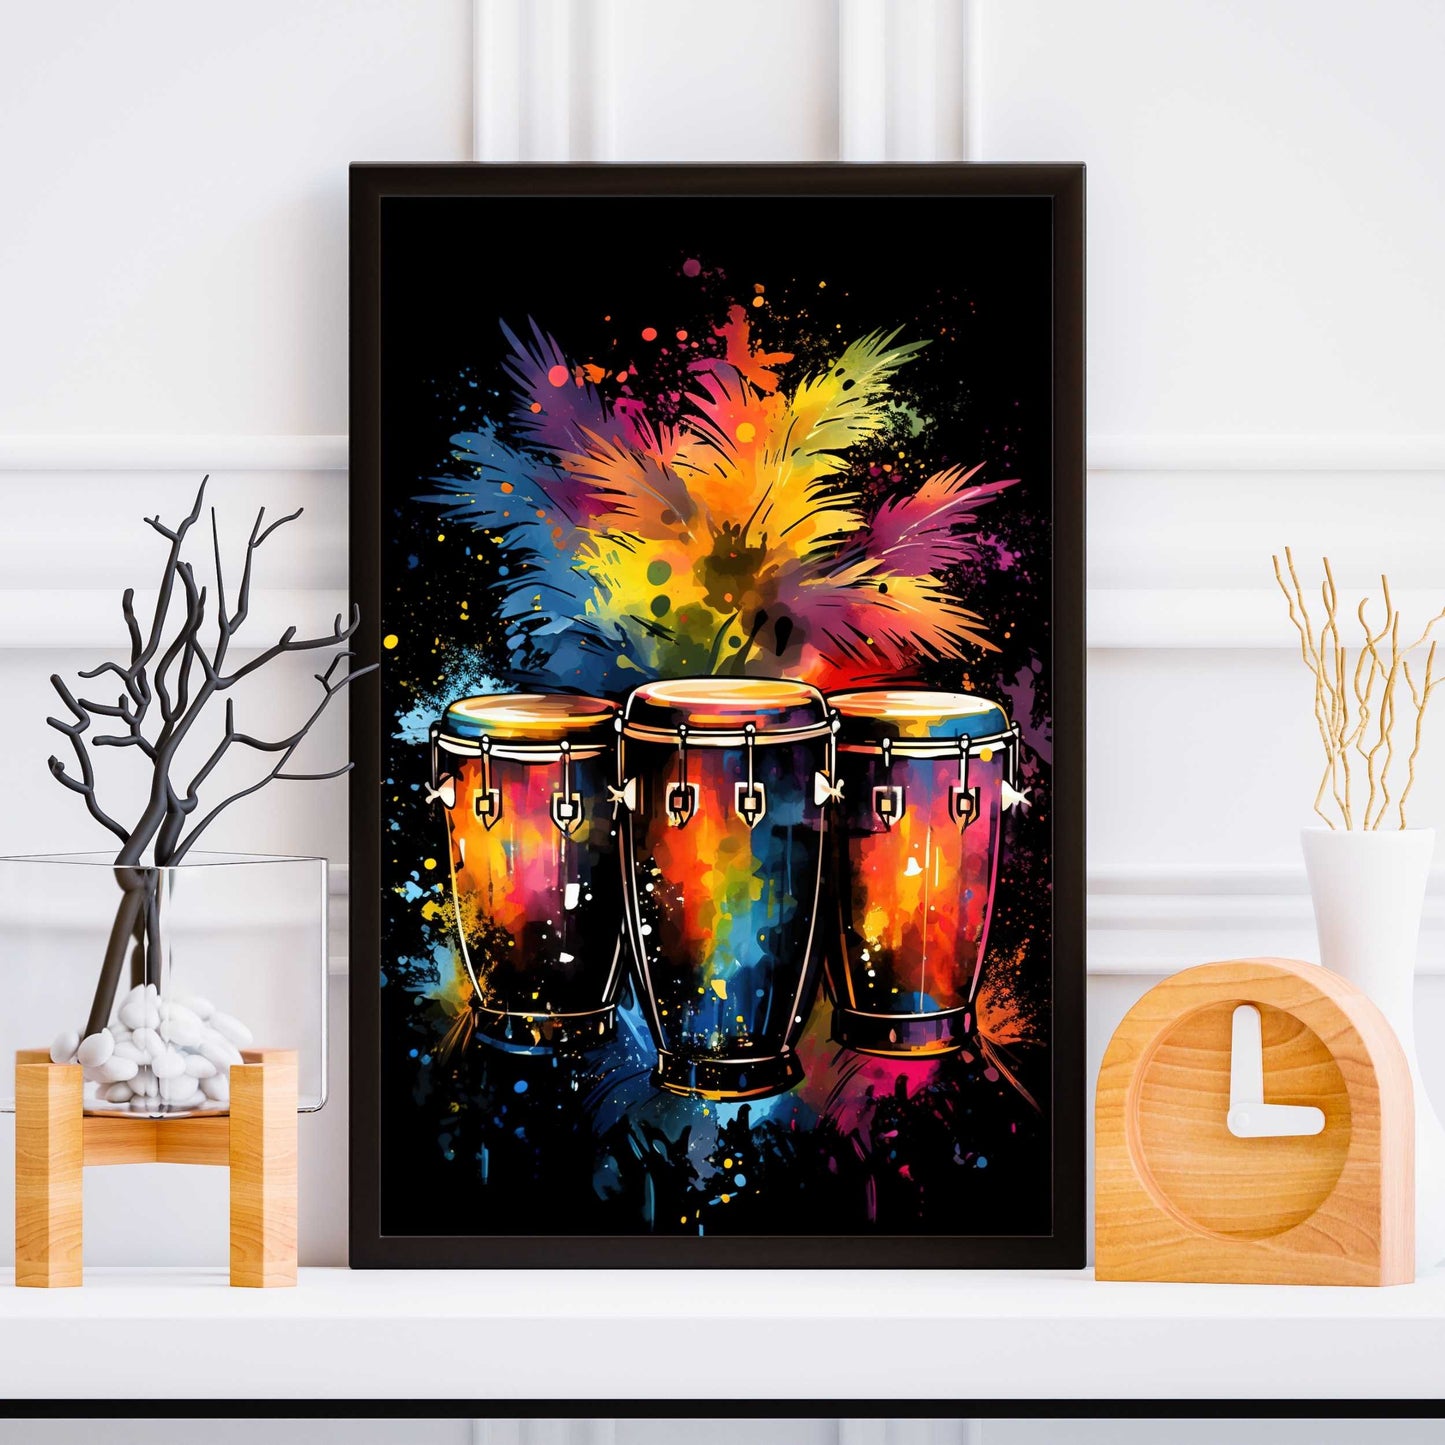 Conga drums Poster | S01